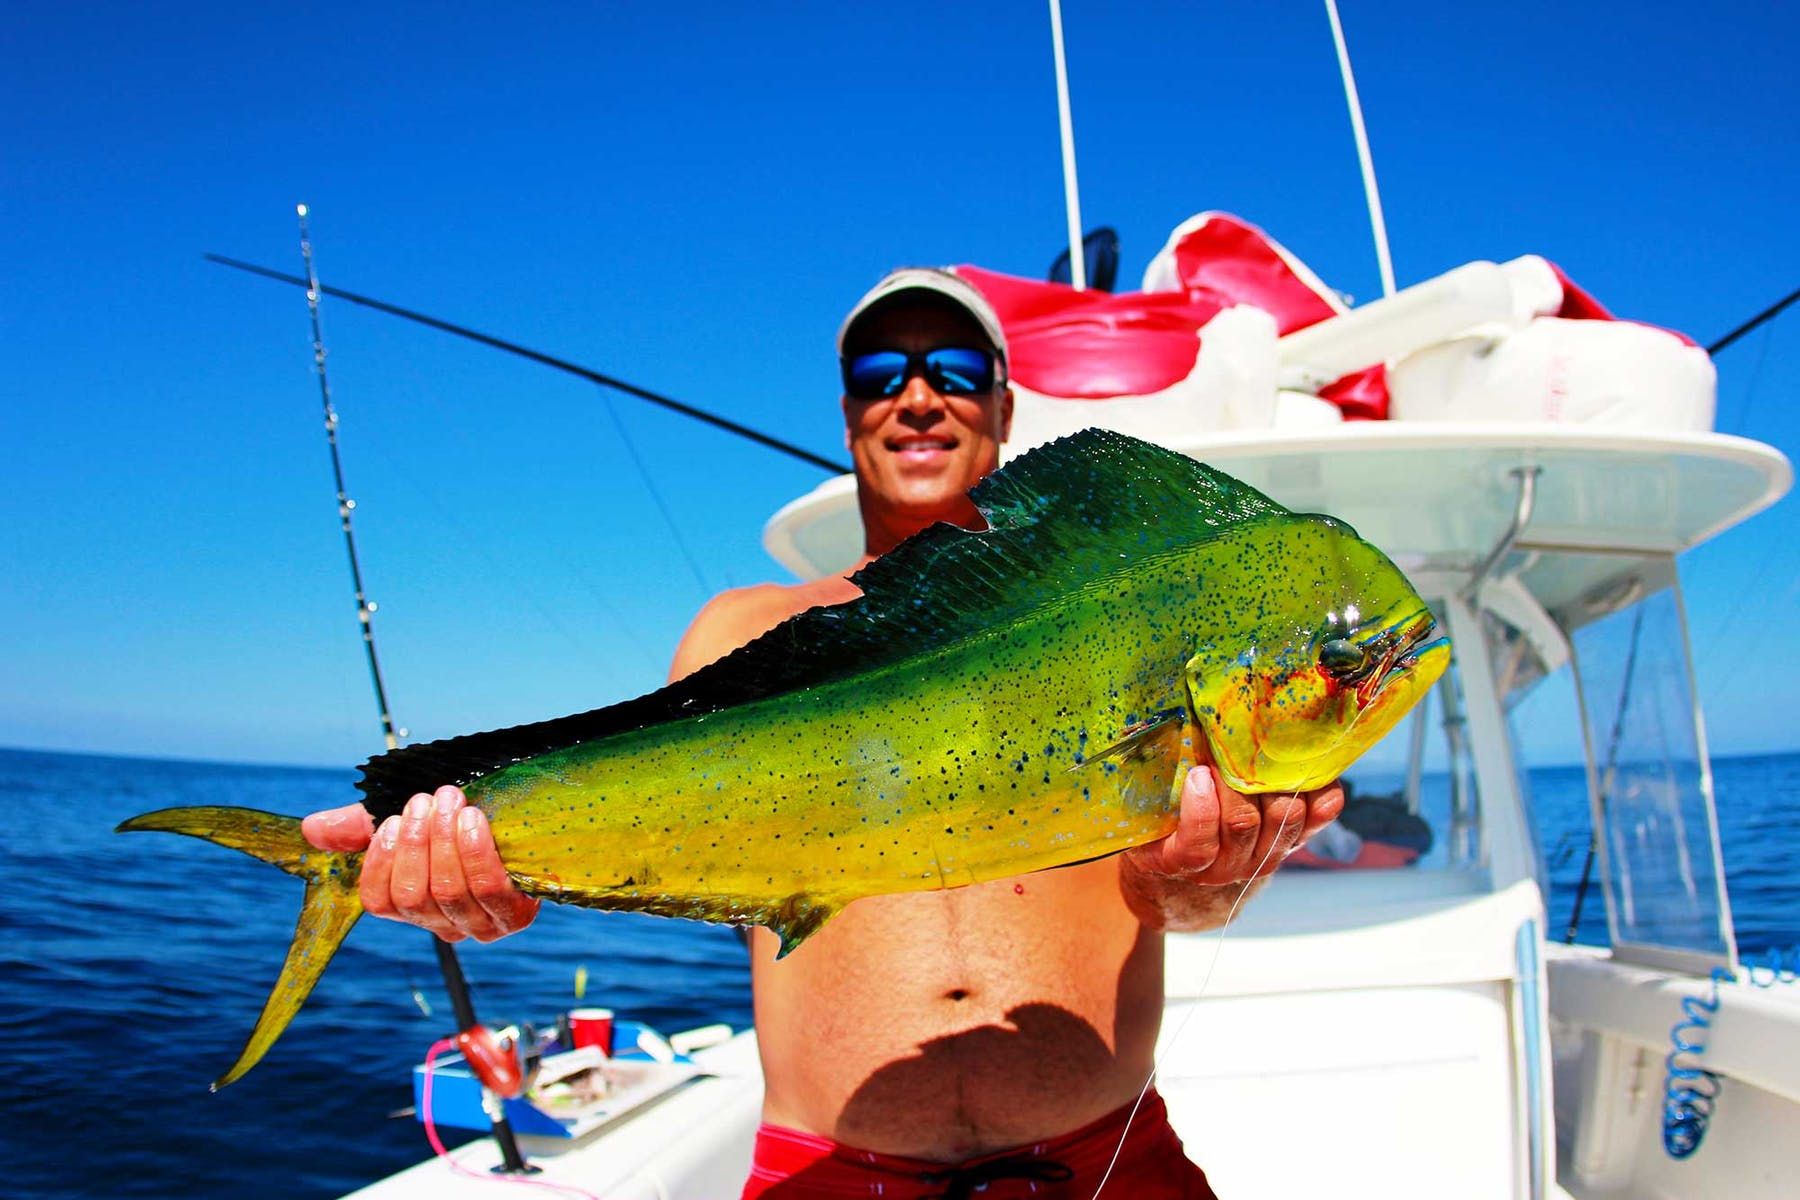 What is the best moderately priced all around big game fishing